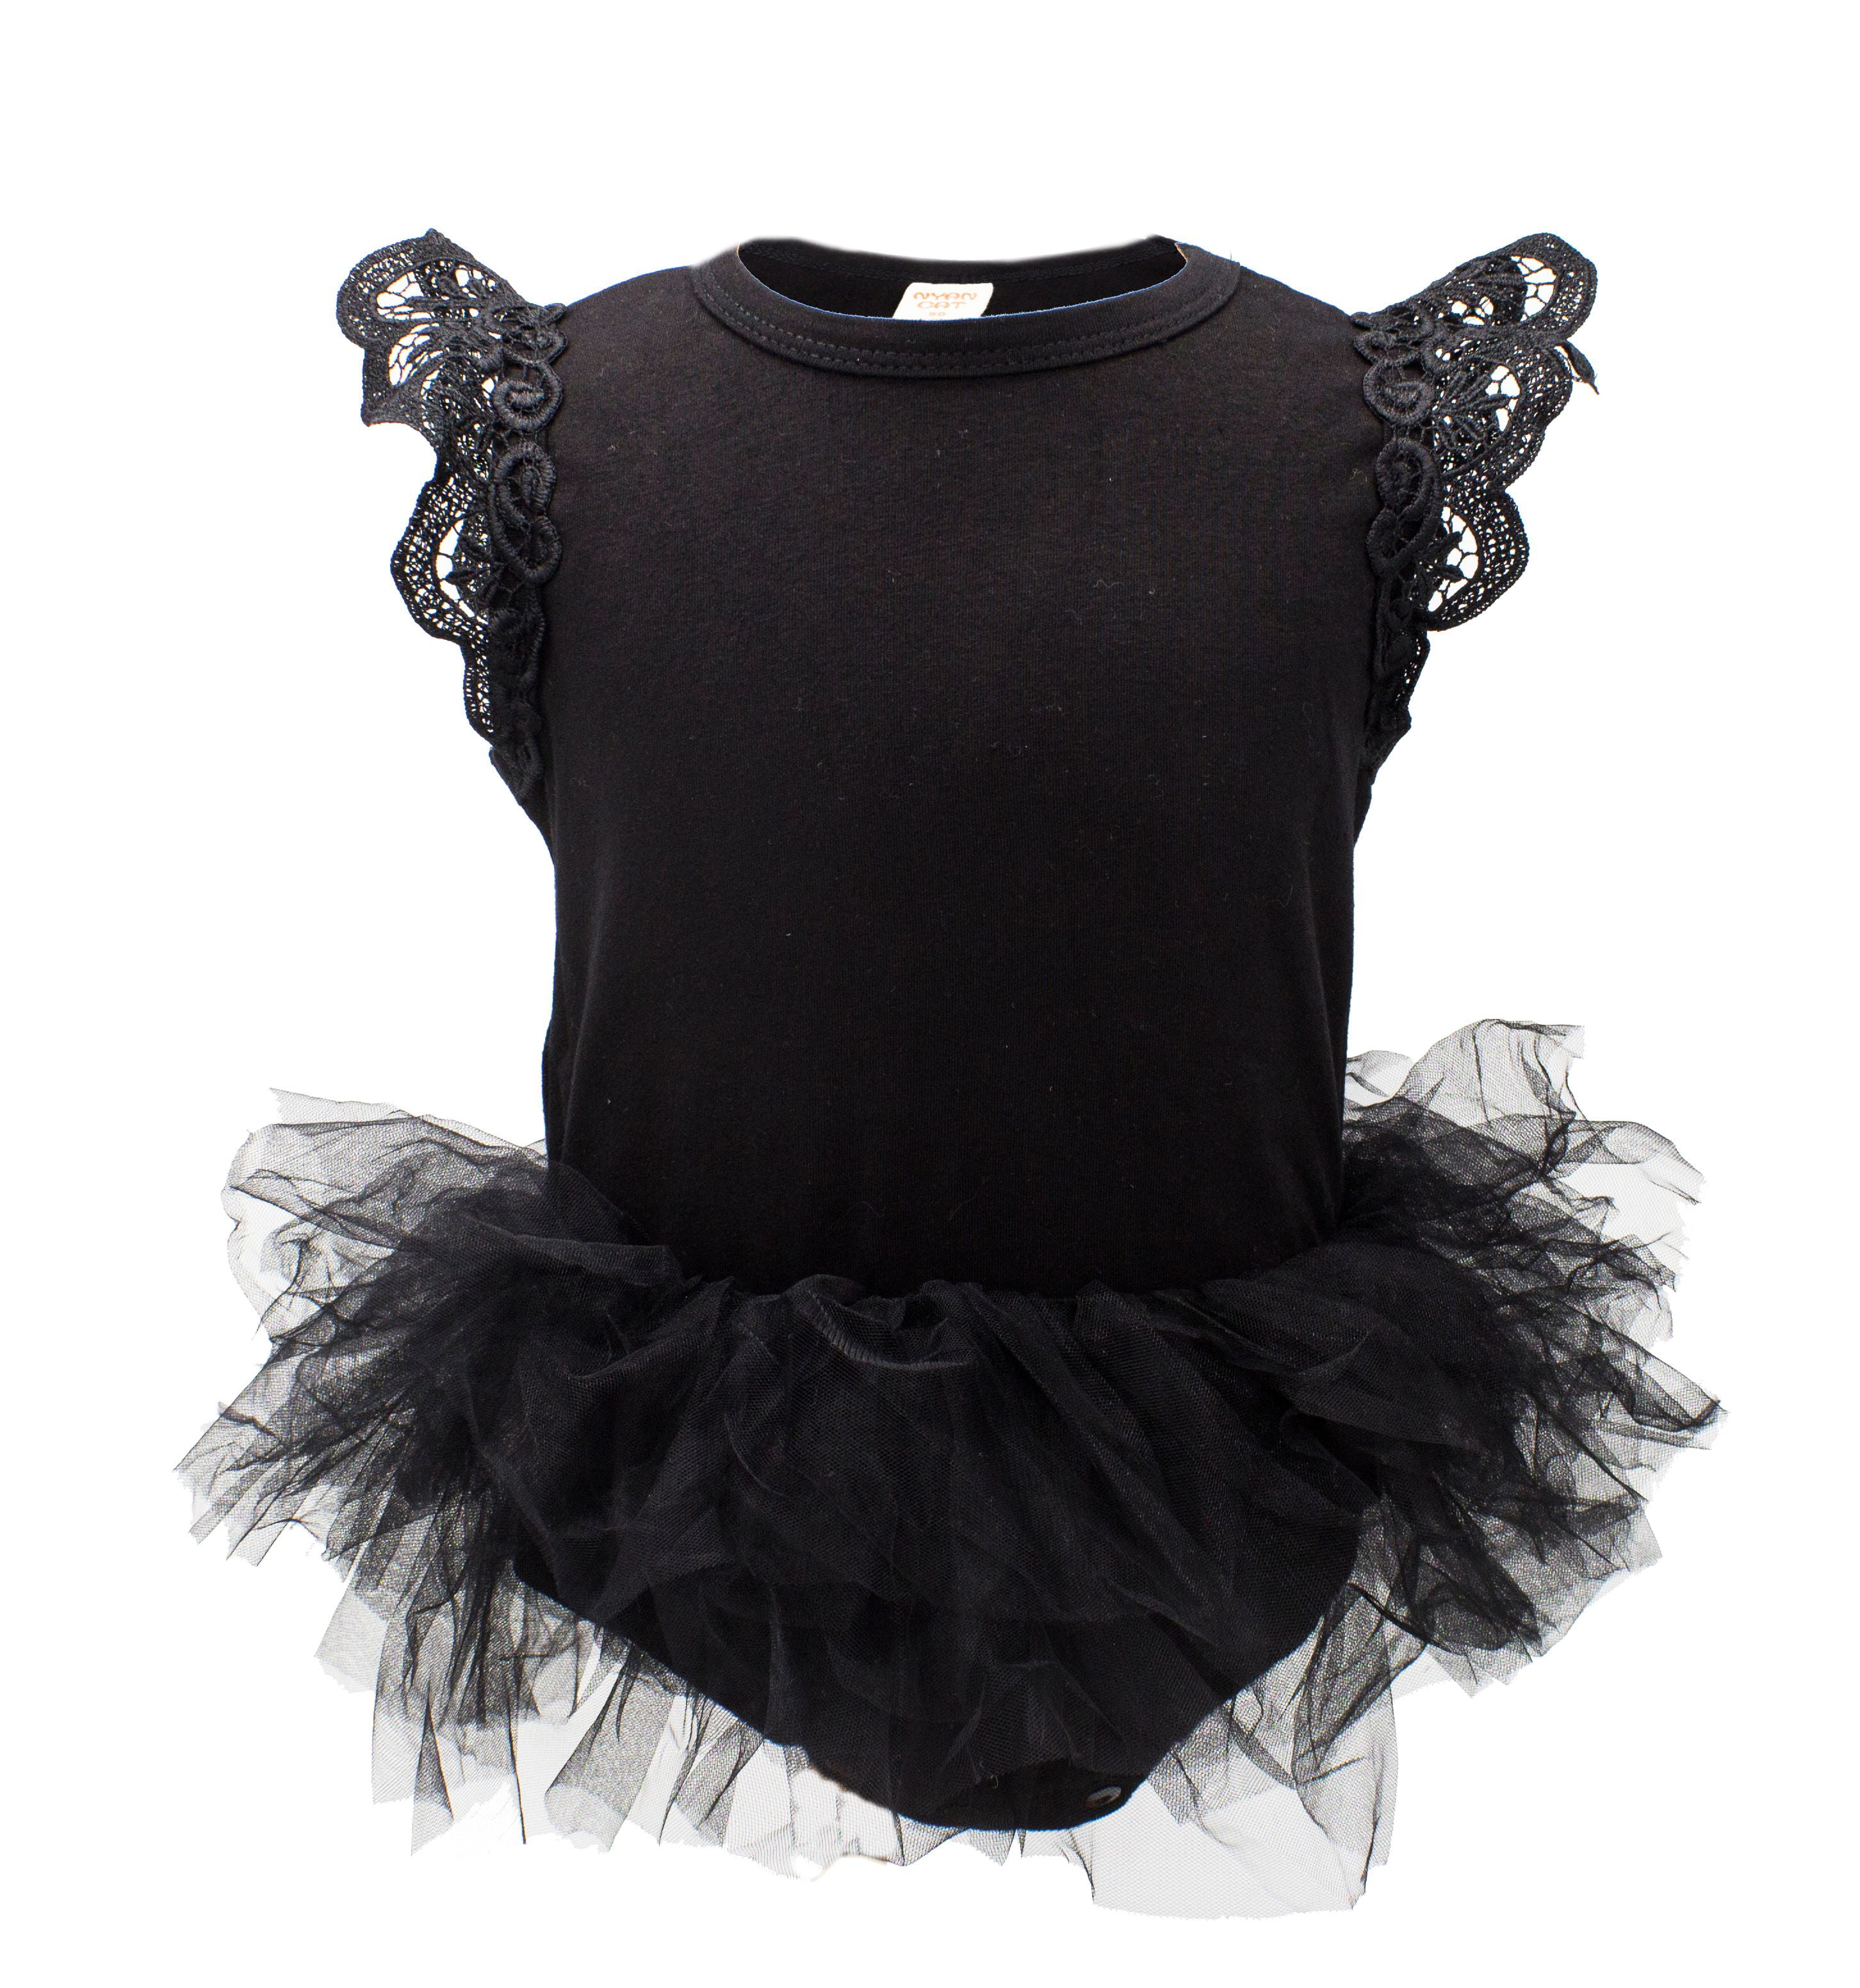 Details about   Baby Girl Clothes Toddler Girl Outfits Princess Dress Long Sleeve Tutu Skirts fo 